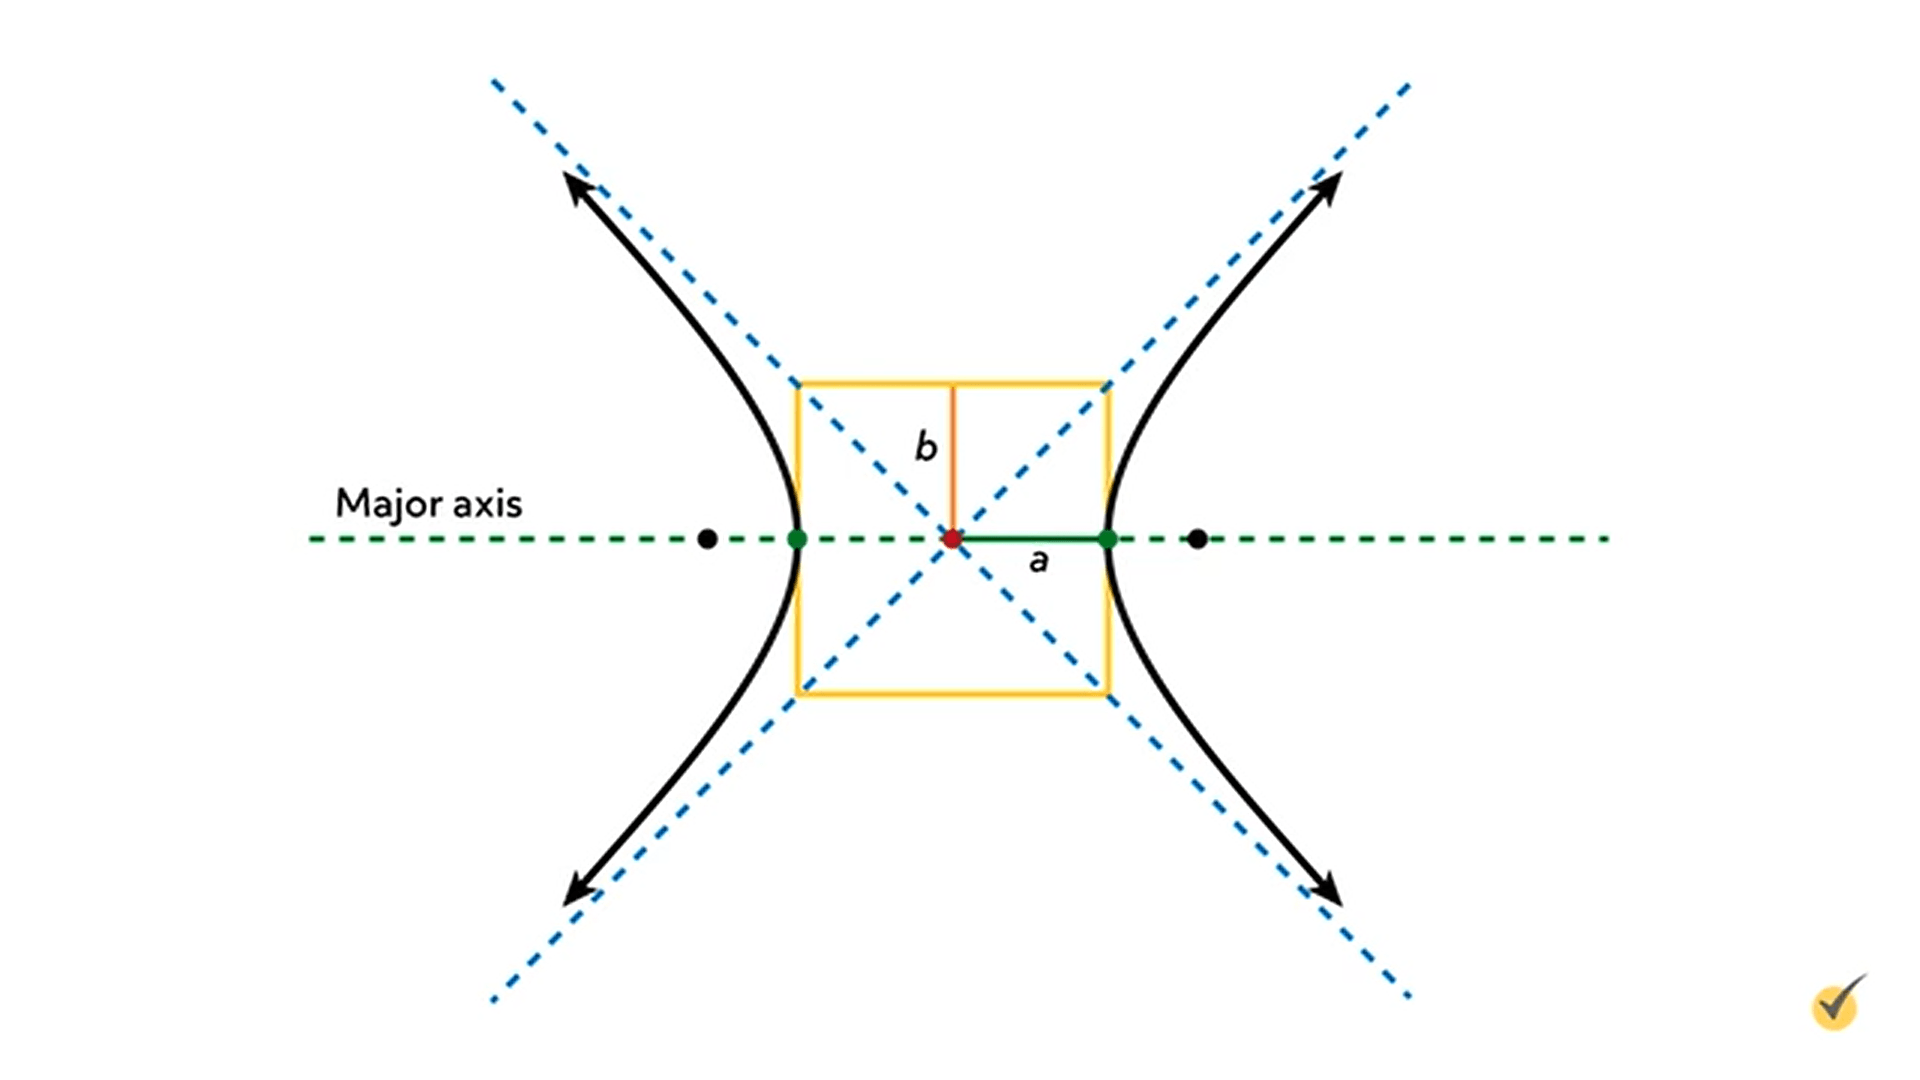 Image of a hyperbolas with 2 foci, center point with perpendicular dashed lines showing the asymptote, vertexes, major axis, and a yellow box with another square inscribed inside with lines B and A.  